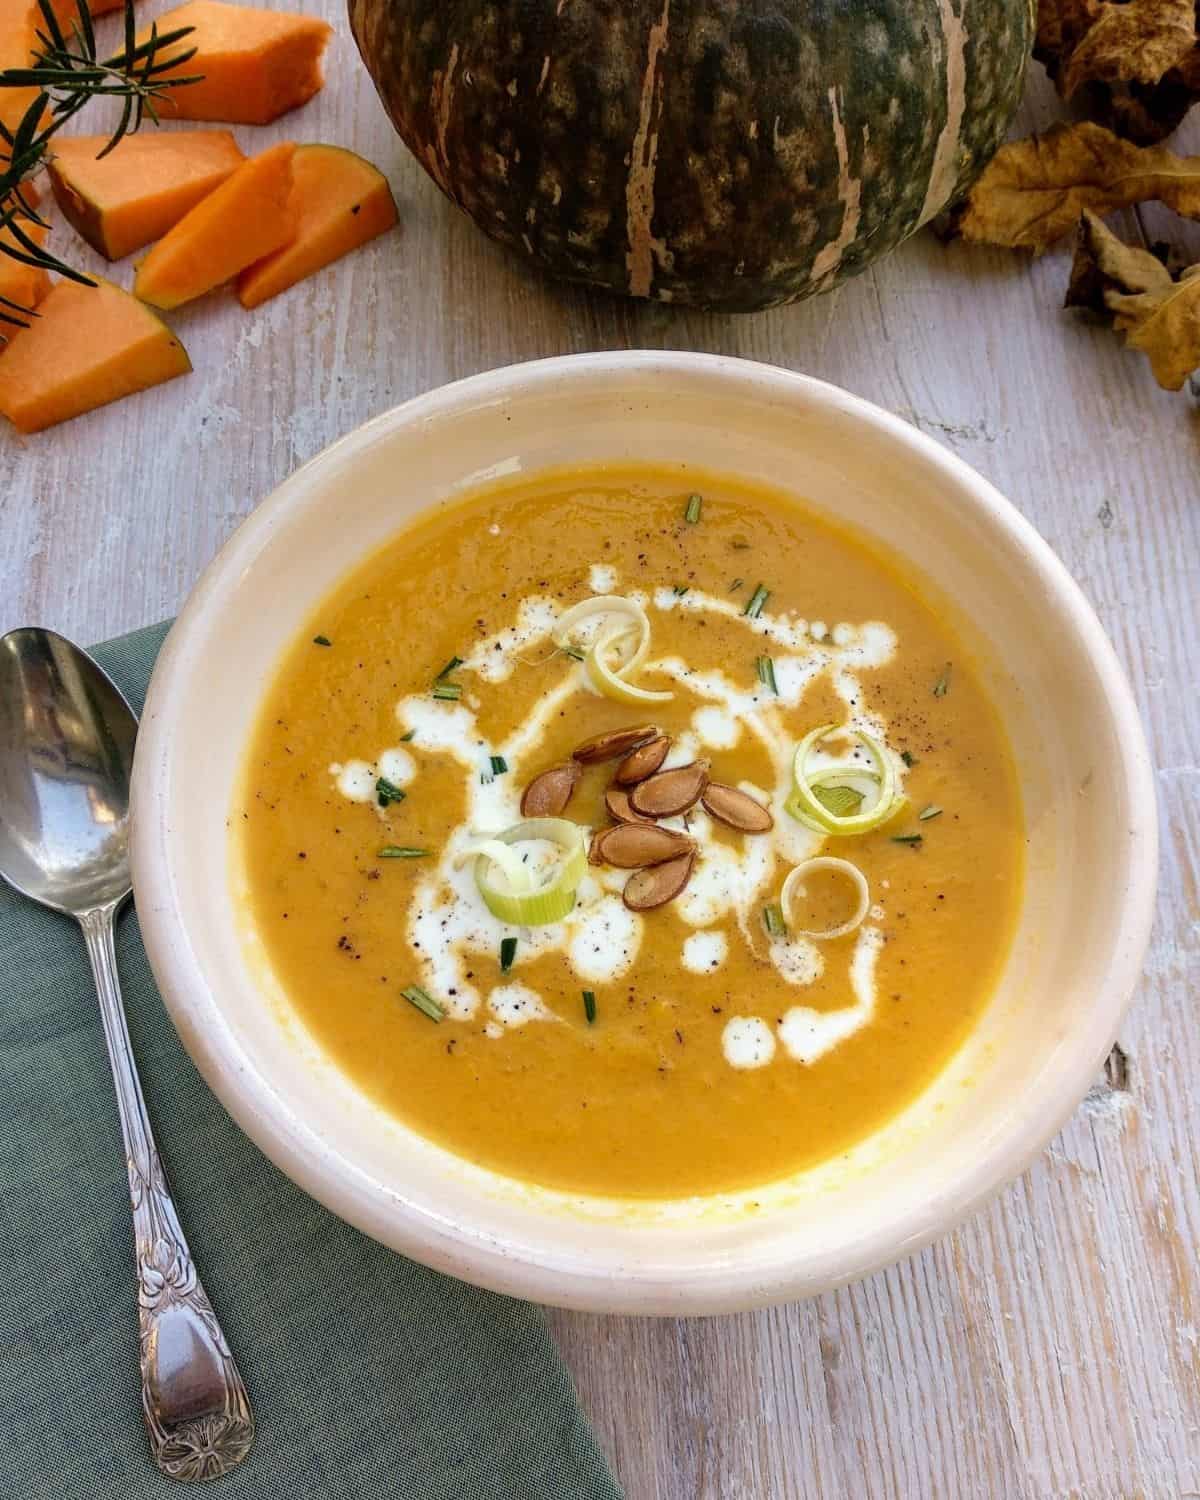 A bowl of pumpkin soup view from above. It’s garnished with seeds and cream